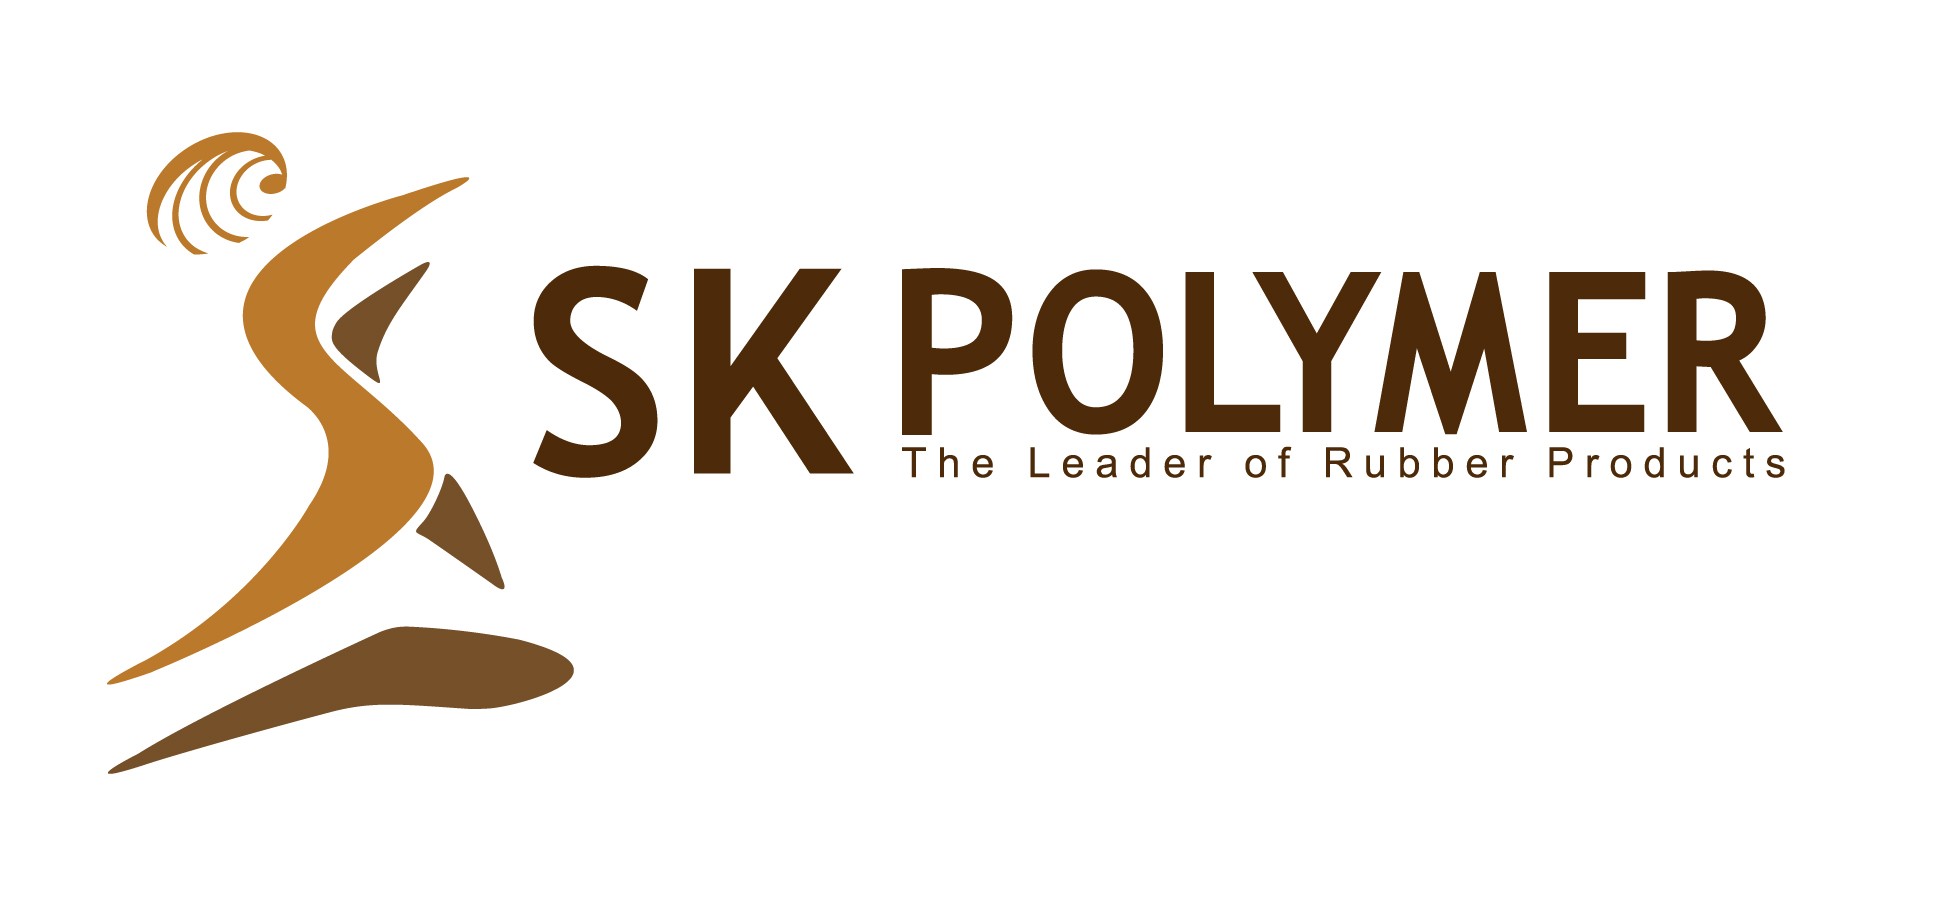 S.K.Polymer "The Leader of Rubber Products"